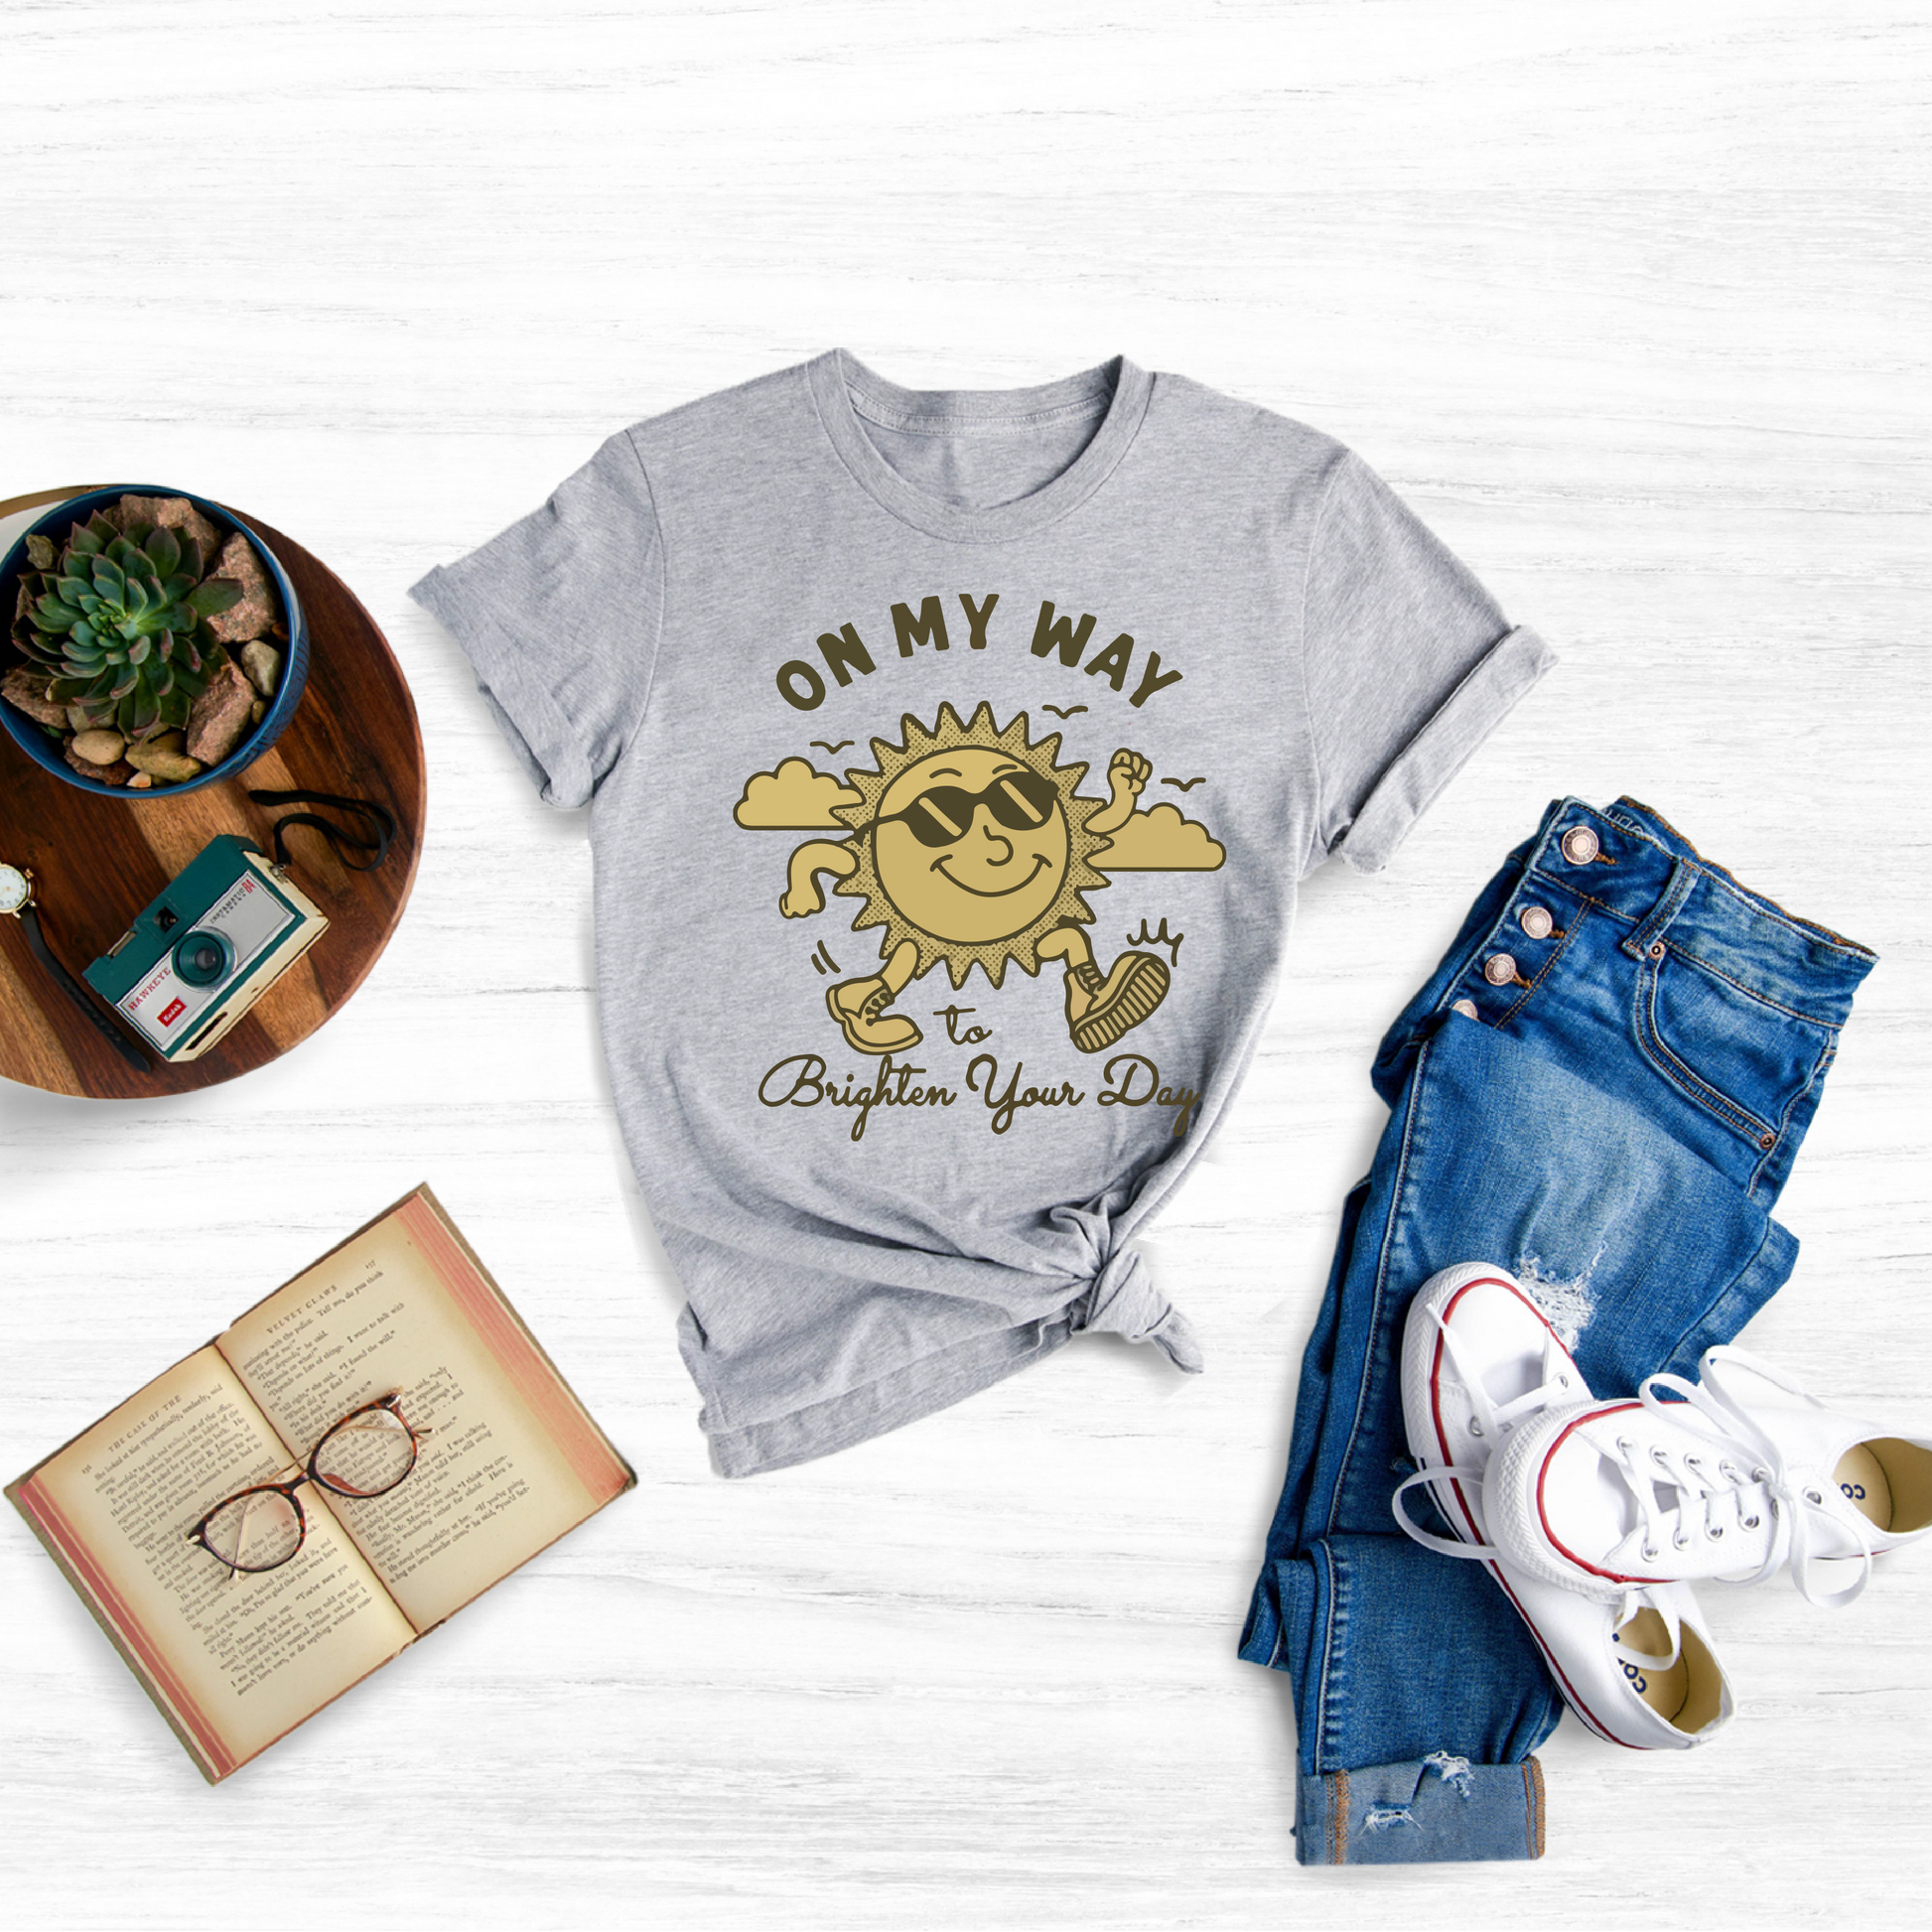 Spread a little sunshine wherever you go with our "Shirt On My Way To Brighten Your Day" T-Shirt, the perfect way to add a touch of positivity and cheer to your everyday wardrobe.